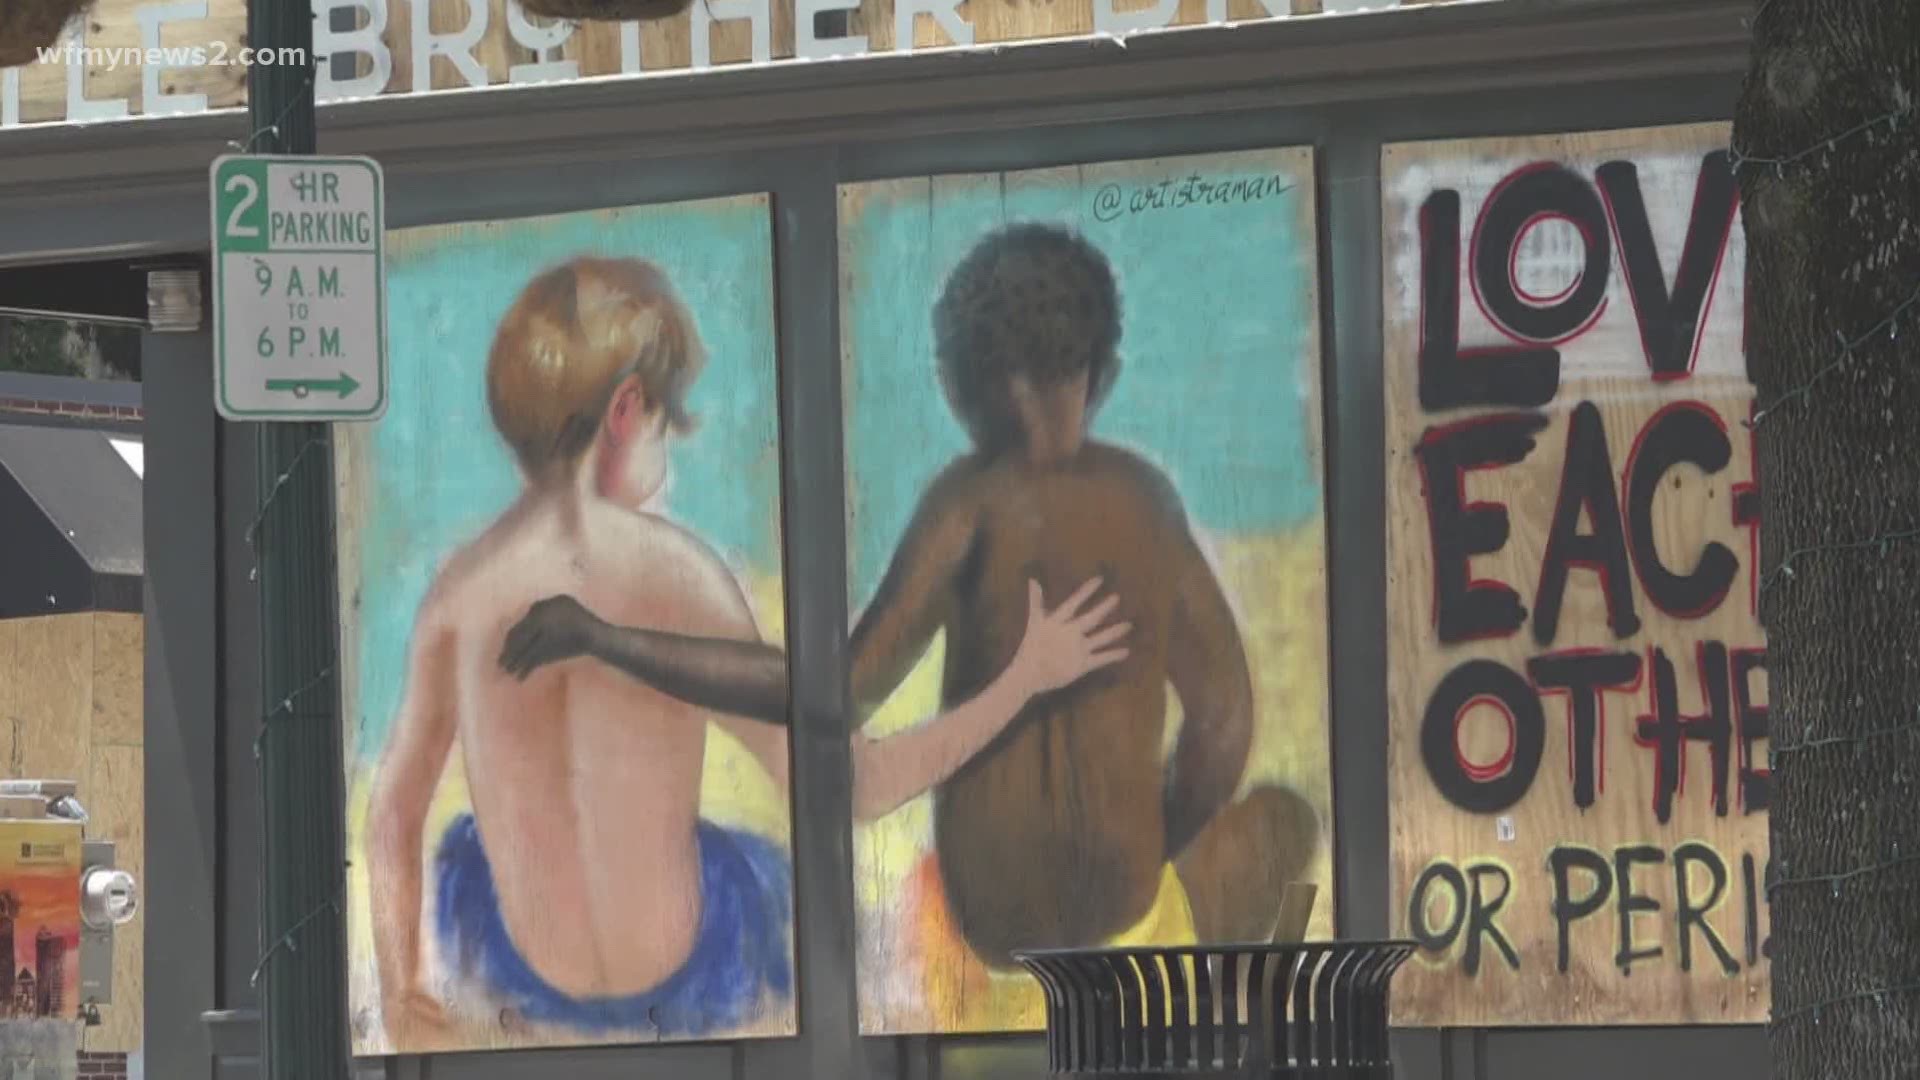 Despite what businesses have gone through downtown, people are using it as a chance to express art through difficult times.